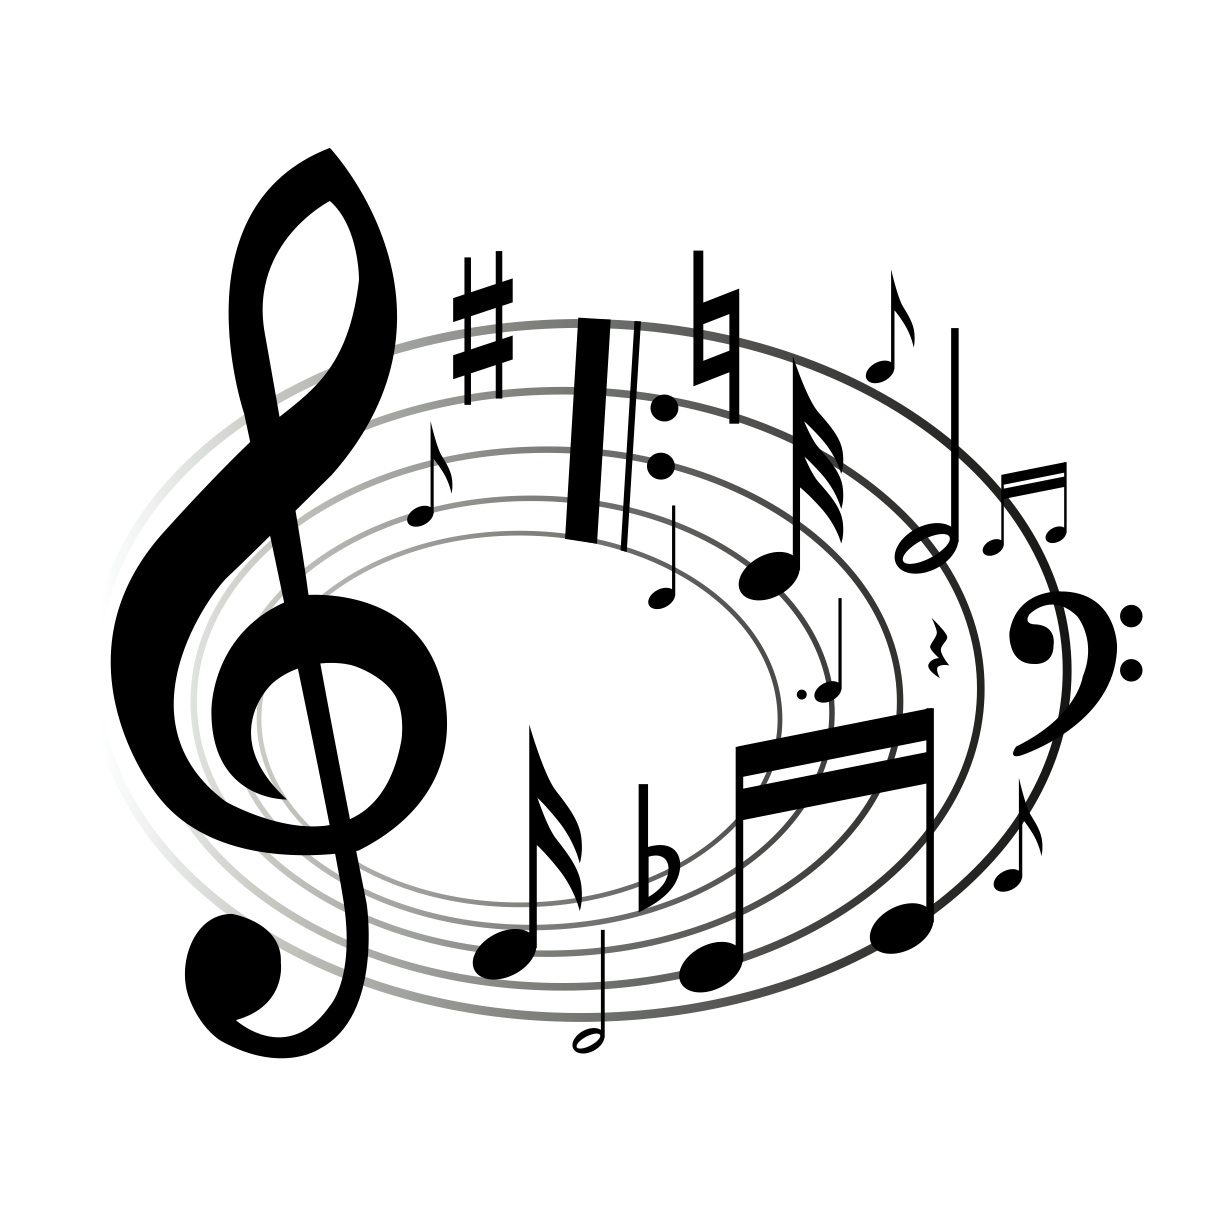 free vector clipart music - photo #1